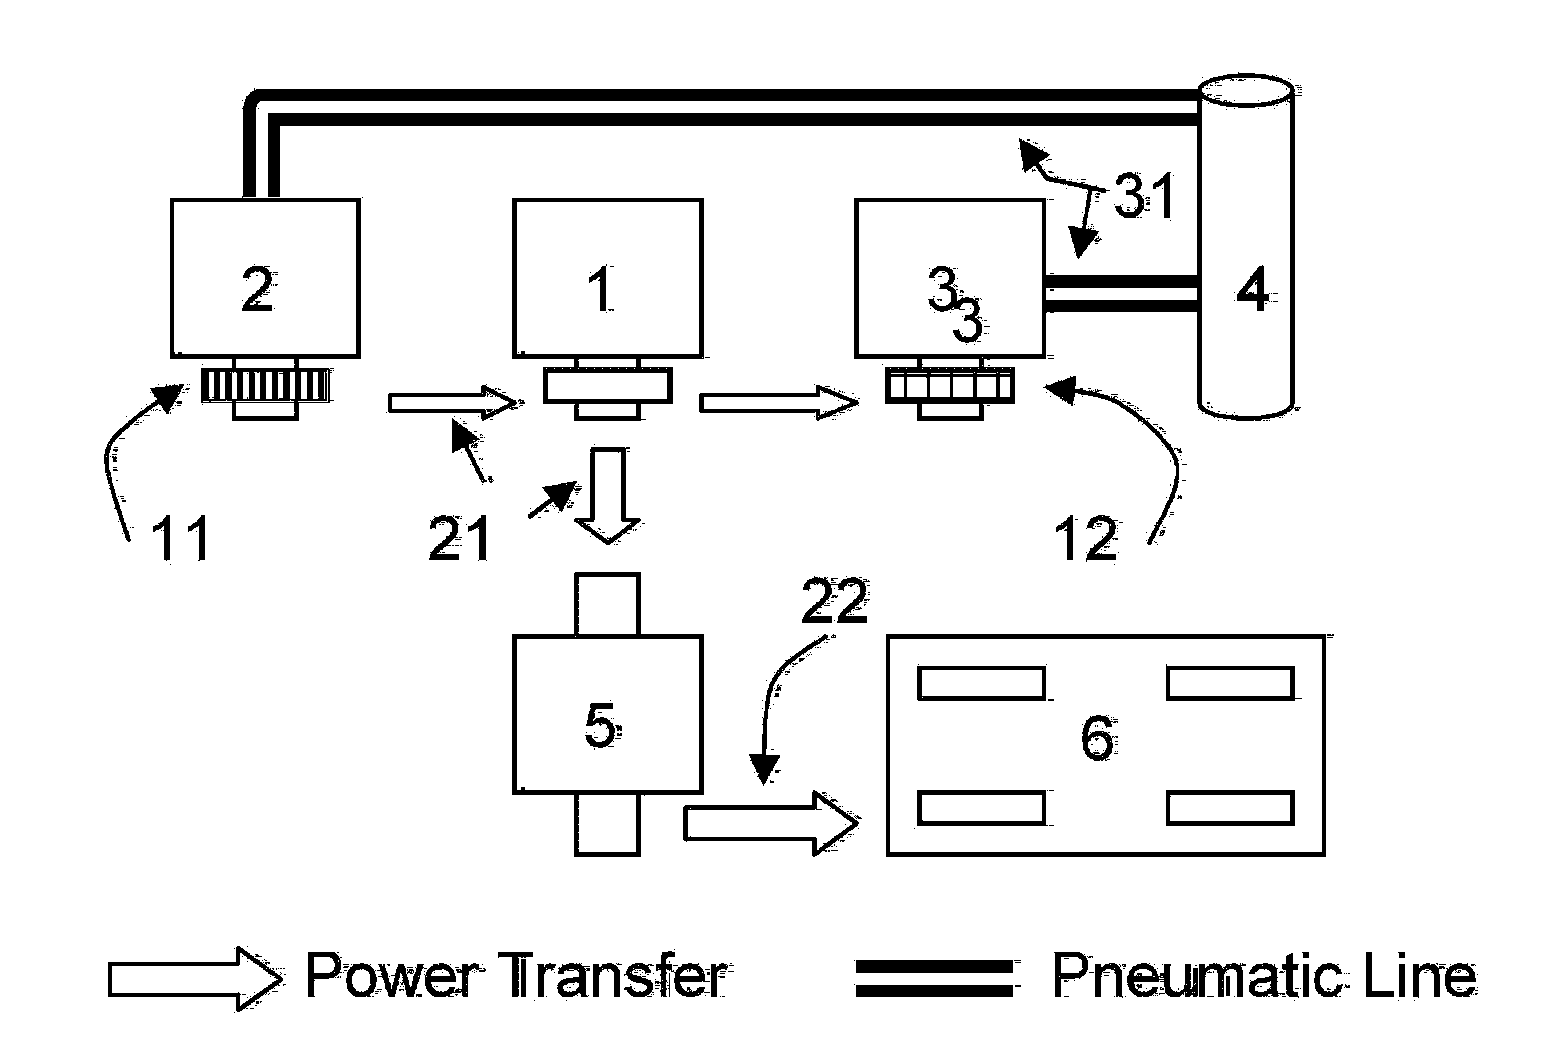 Pneumatic - IC engine based power management system for automobiles and the like